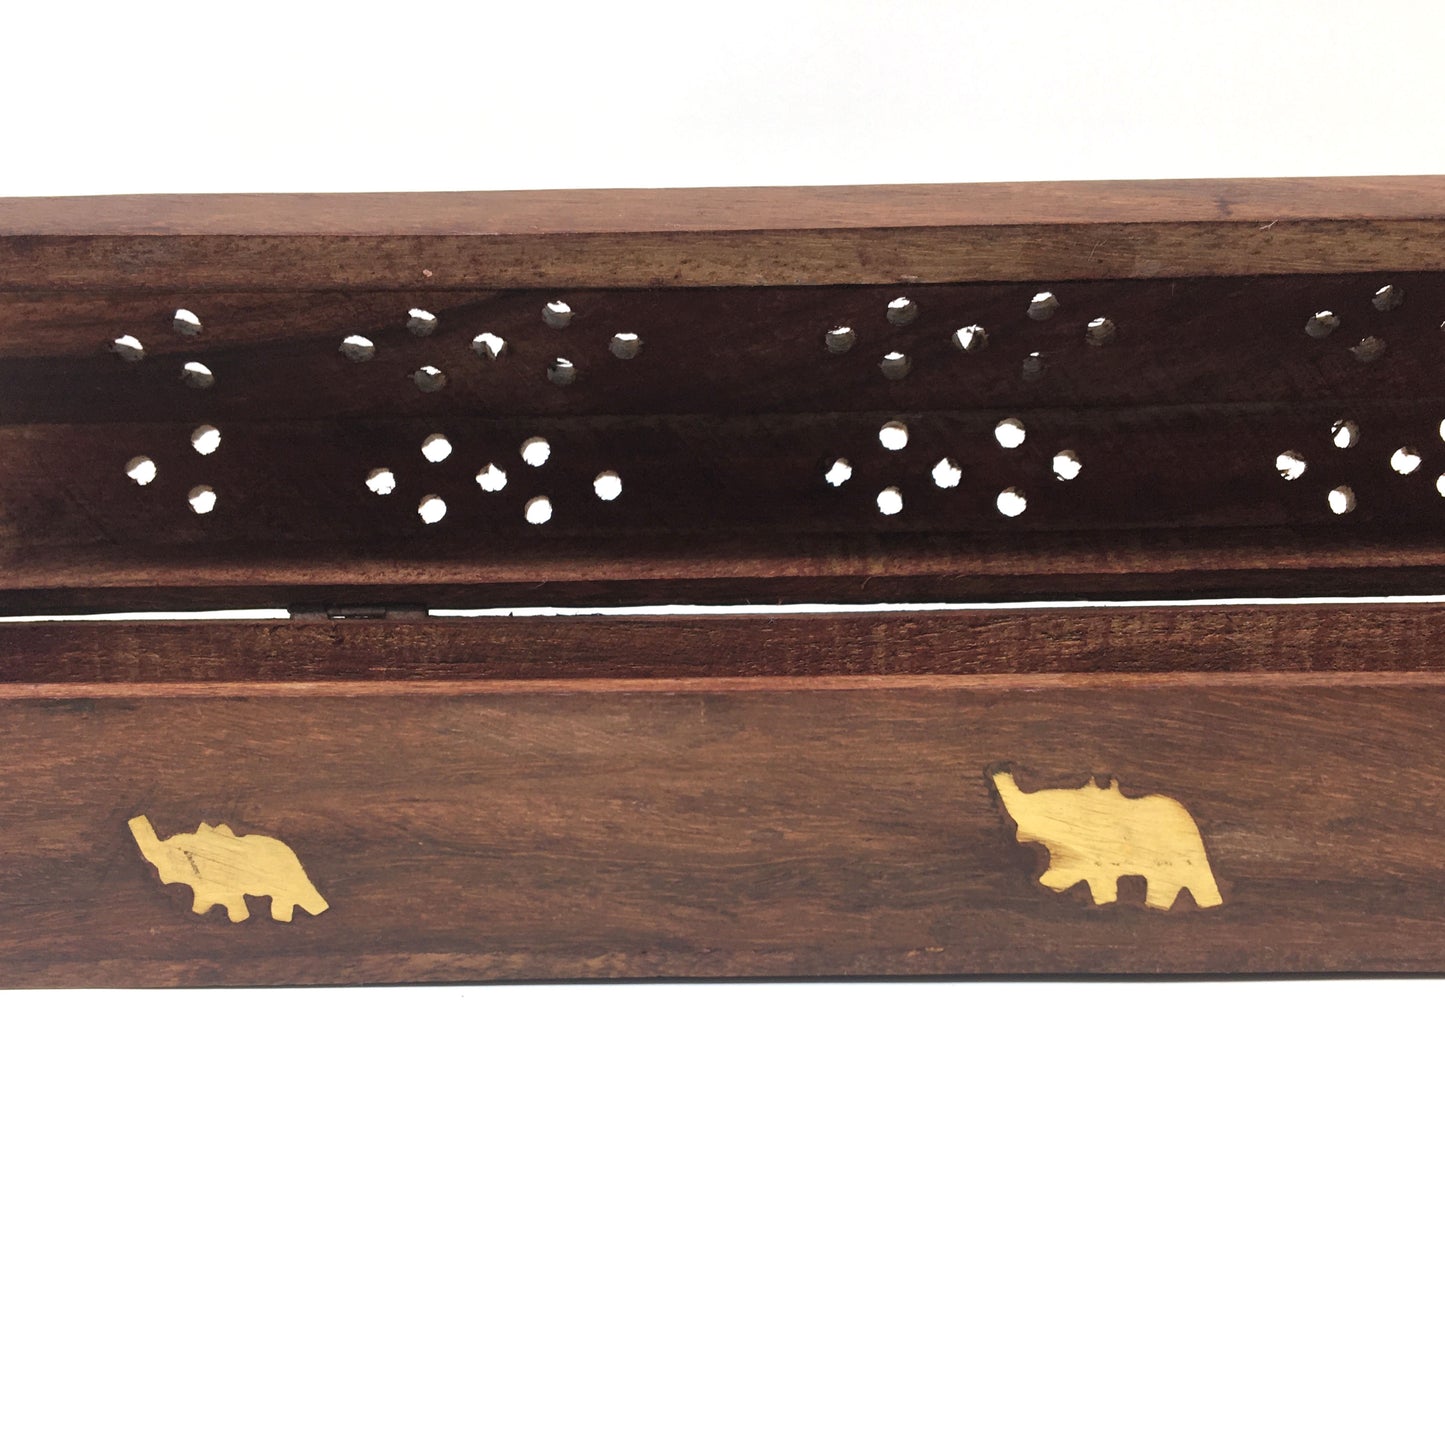 India Incense Burner Handcrafted Wooden Box with Storage - Elephants Design 12"